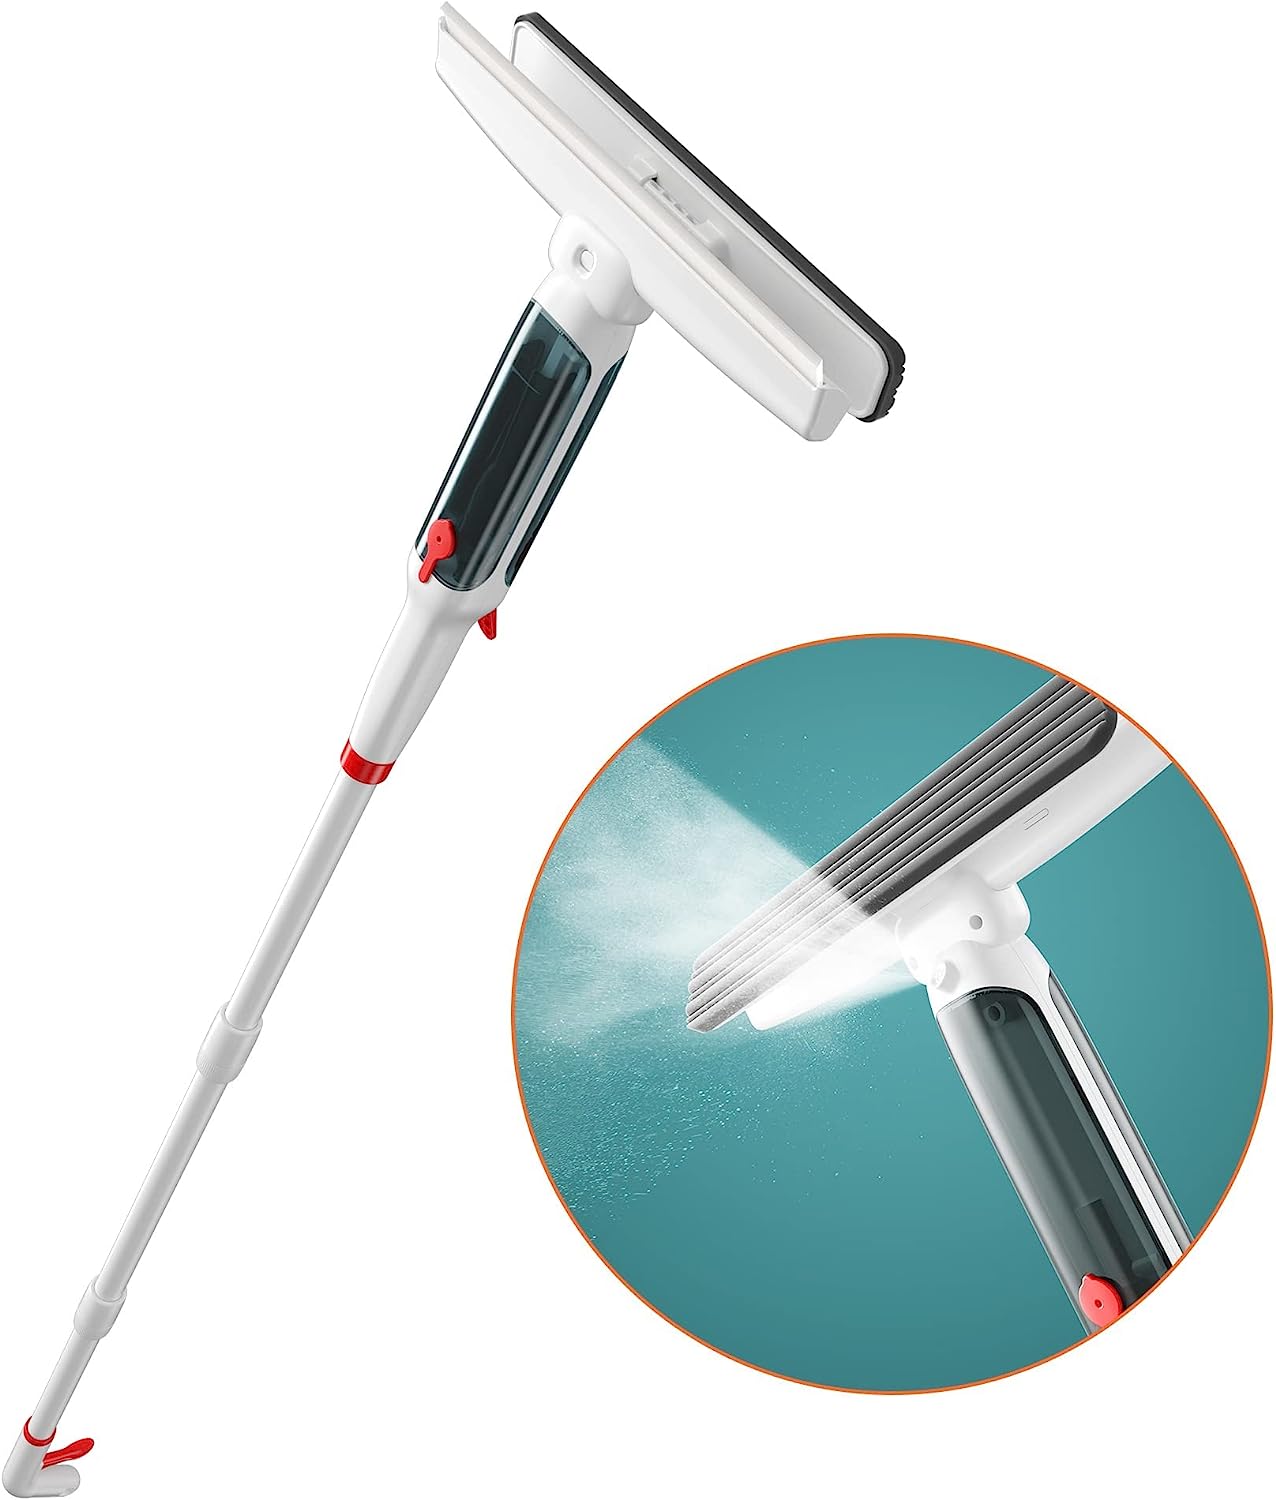 Fieploom Squeegee Window Cleaning Kit with [...]